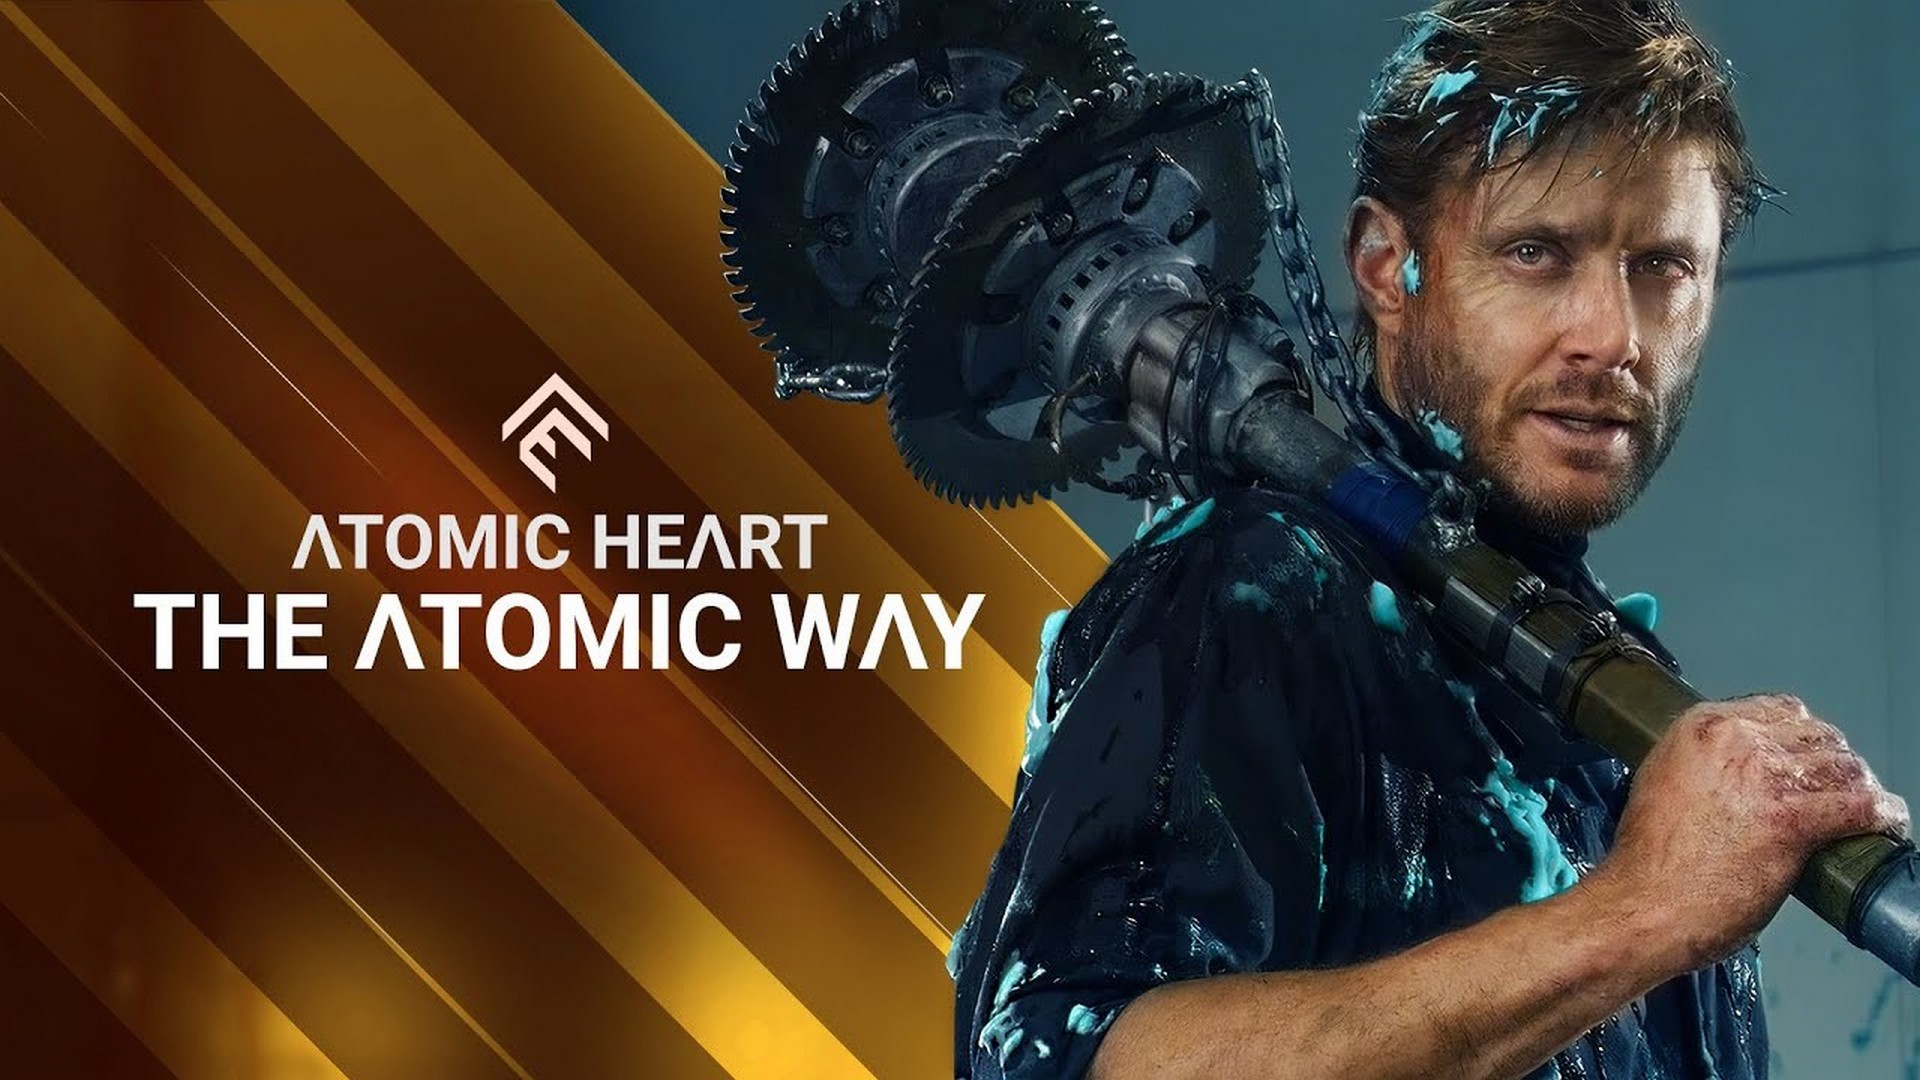 Atomic Heart – Skip School & Let Jensen Ackles Fast-Track You To The Dangerously Close Release Of The Game